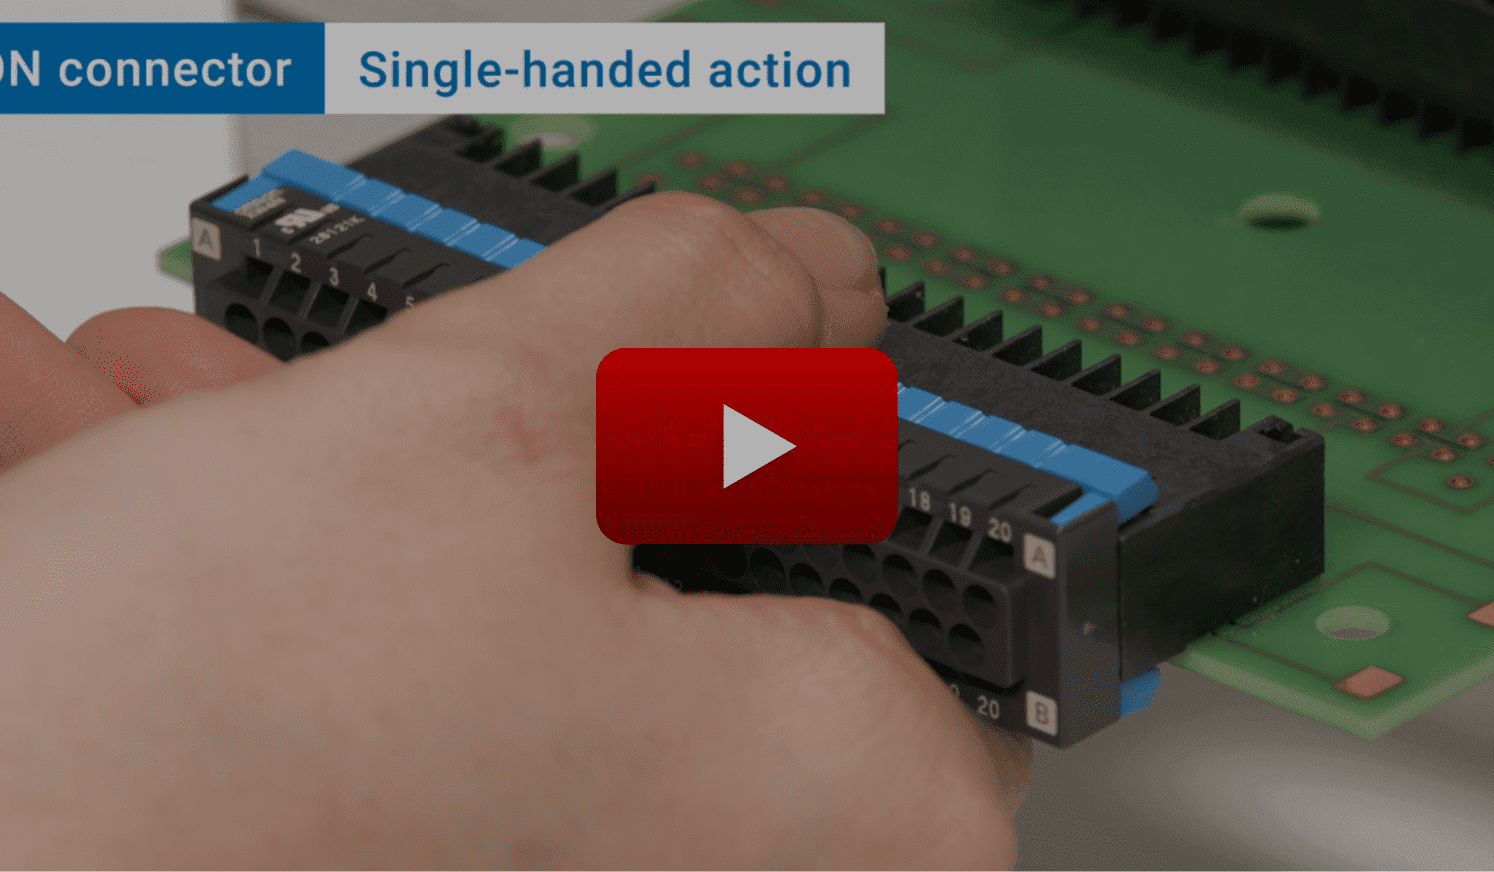 Single-handed action video